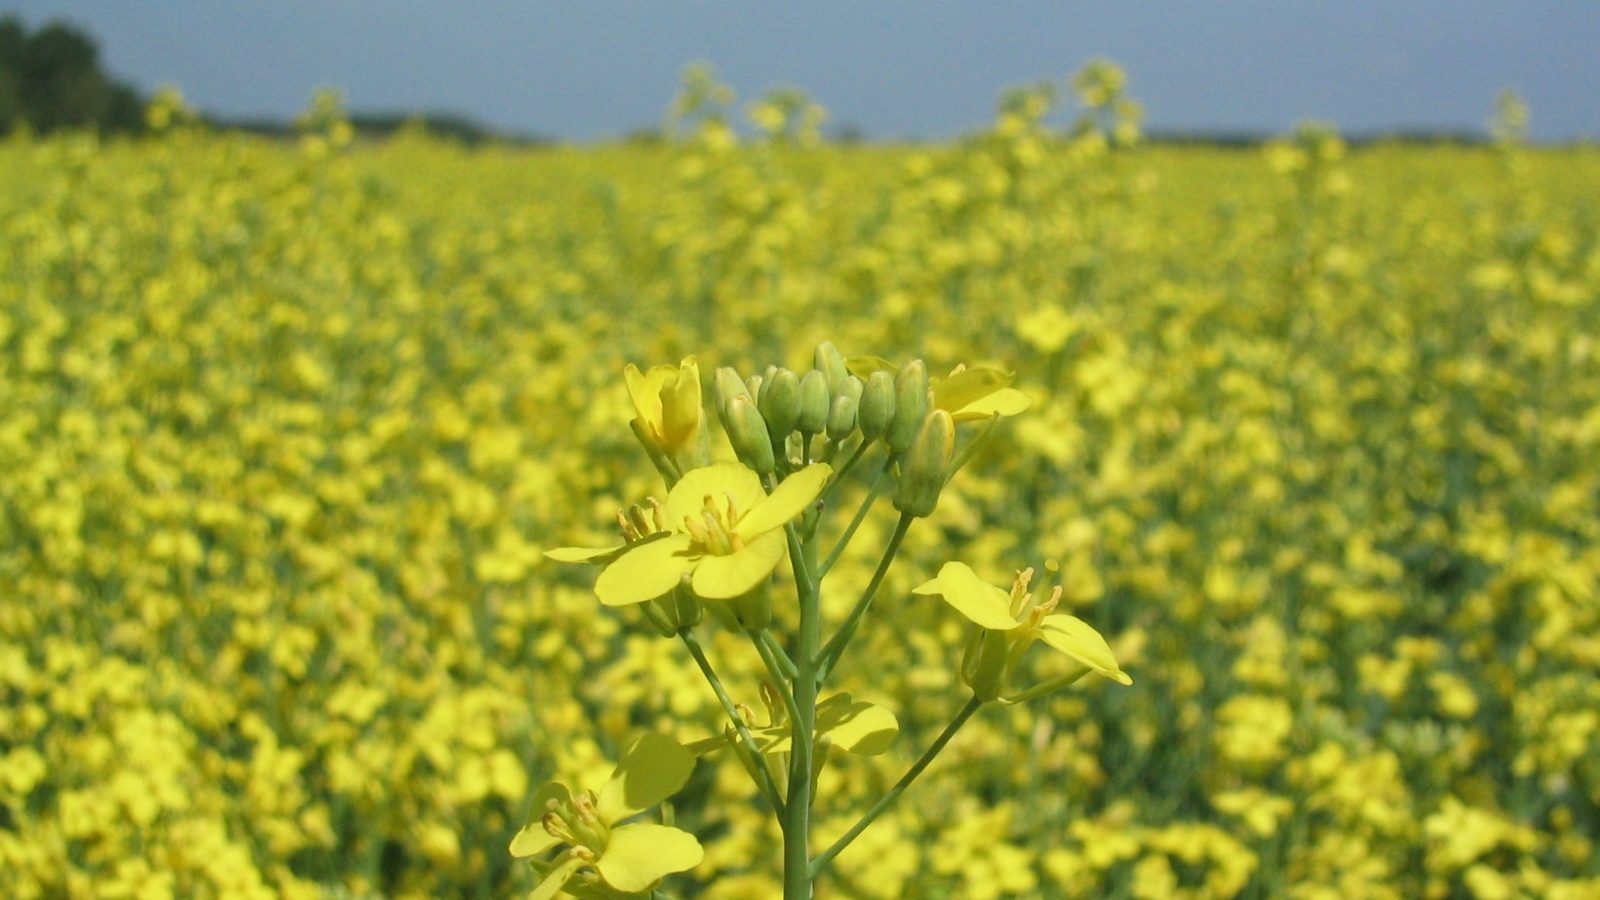 Landscape photo of a field of canola plants. A close up of a single plant with flowers and buds is front and center of the frame.